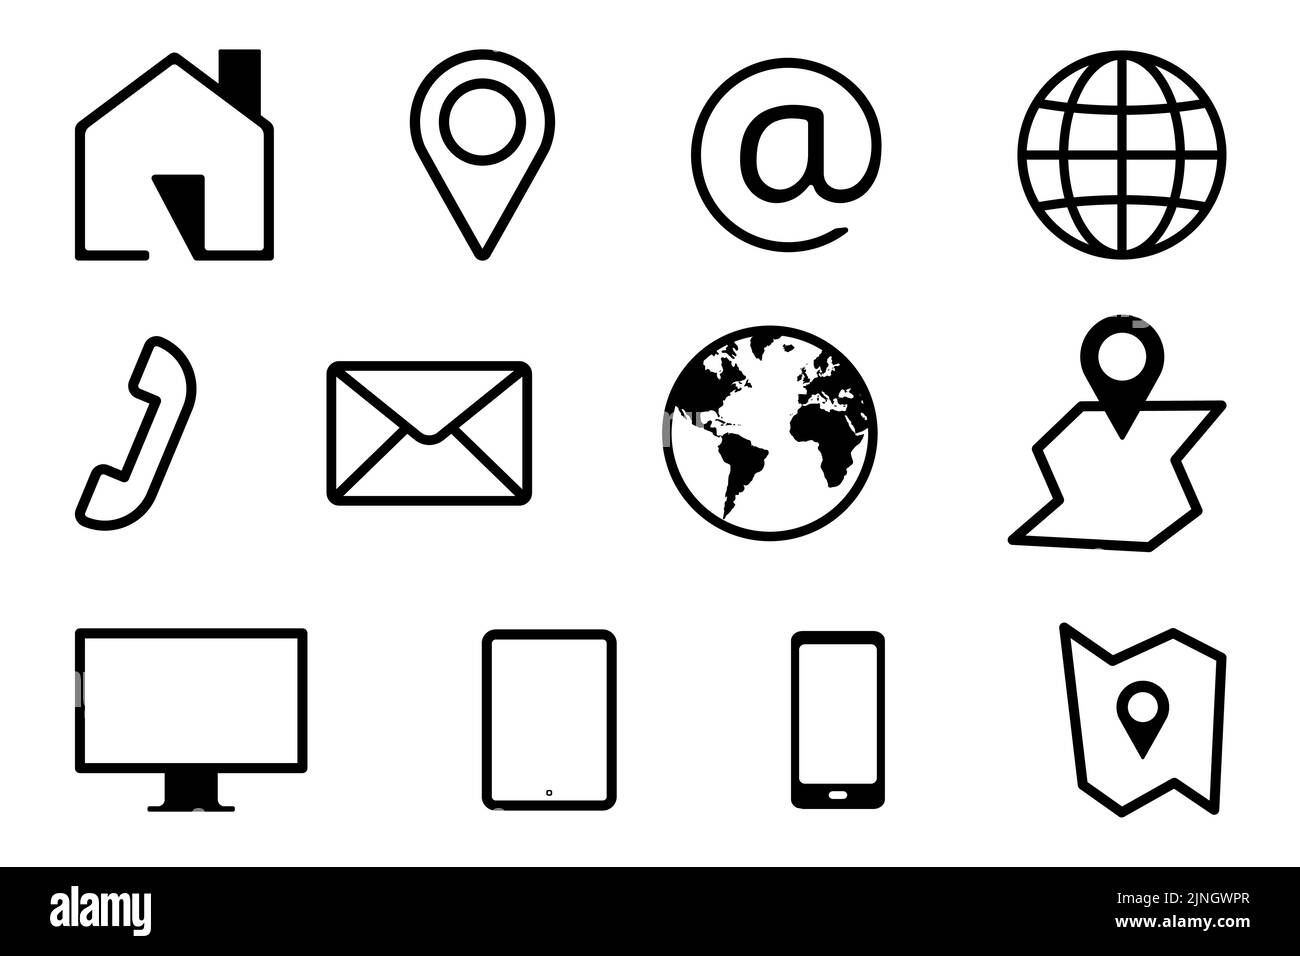 Business contact icon set. Group of Communication symbols for web and mobile app. Outline style Vector illustration Stock Vector